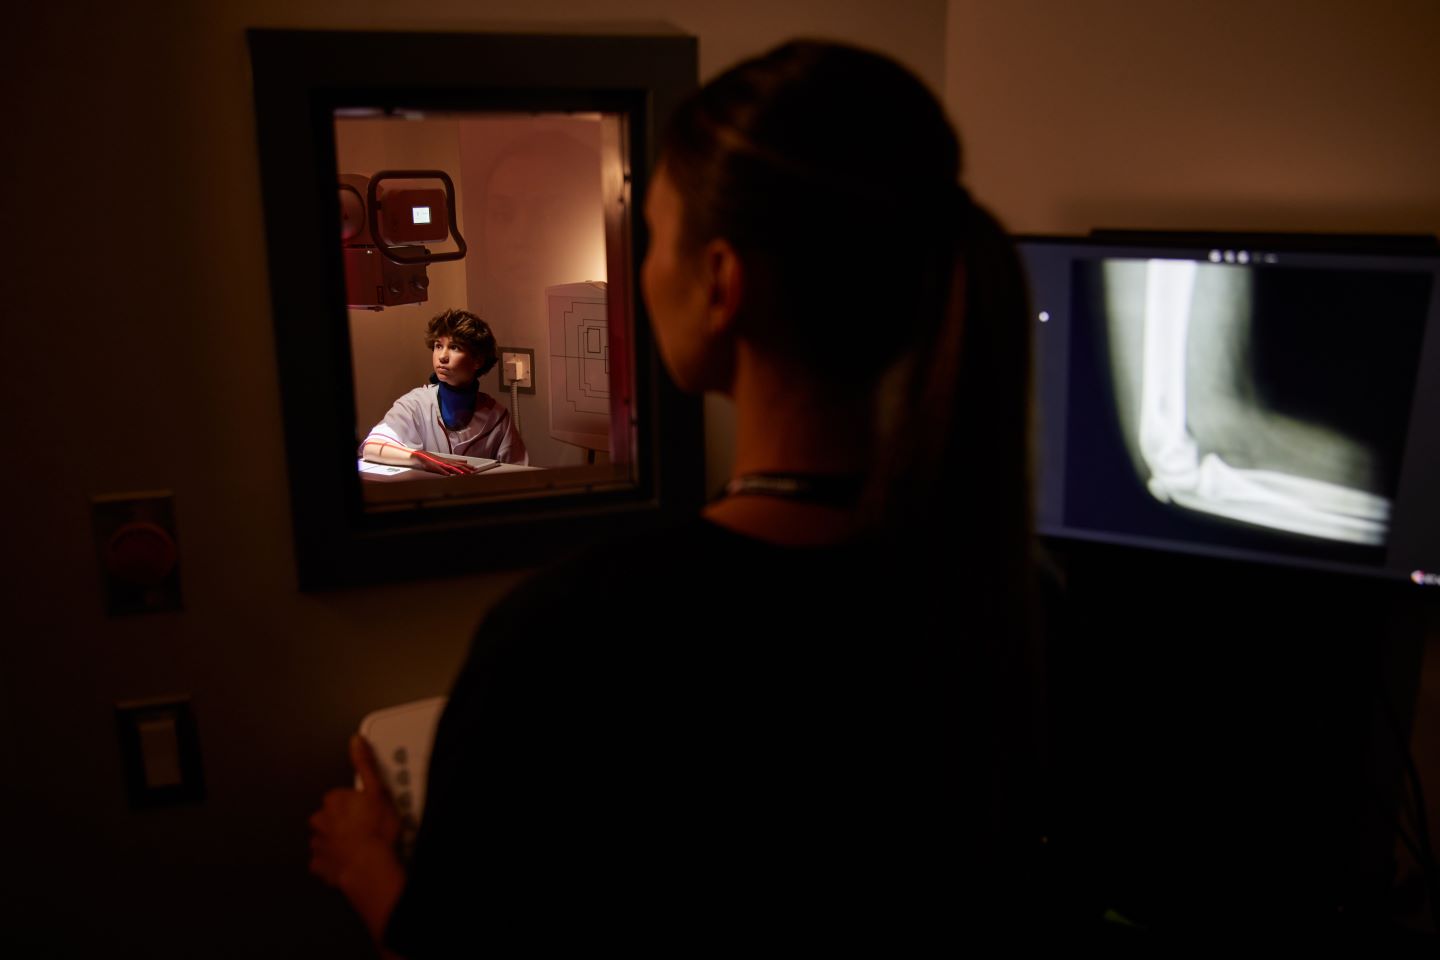 A person analyzing an X-ray image on a computer monitor, with another individual observing